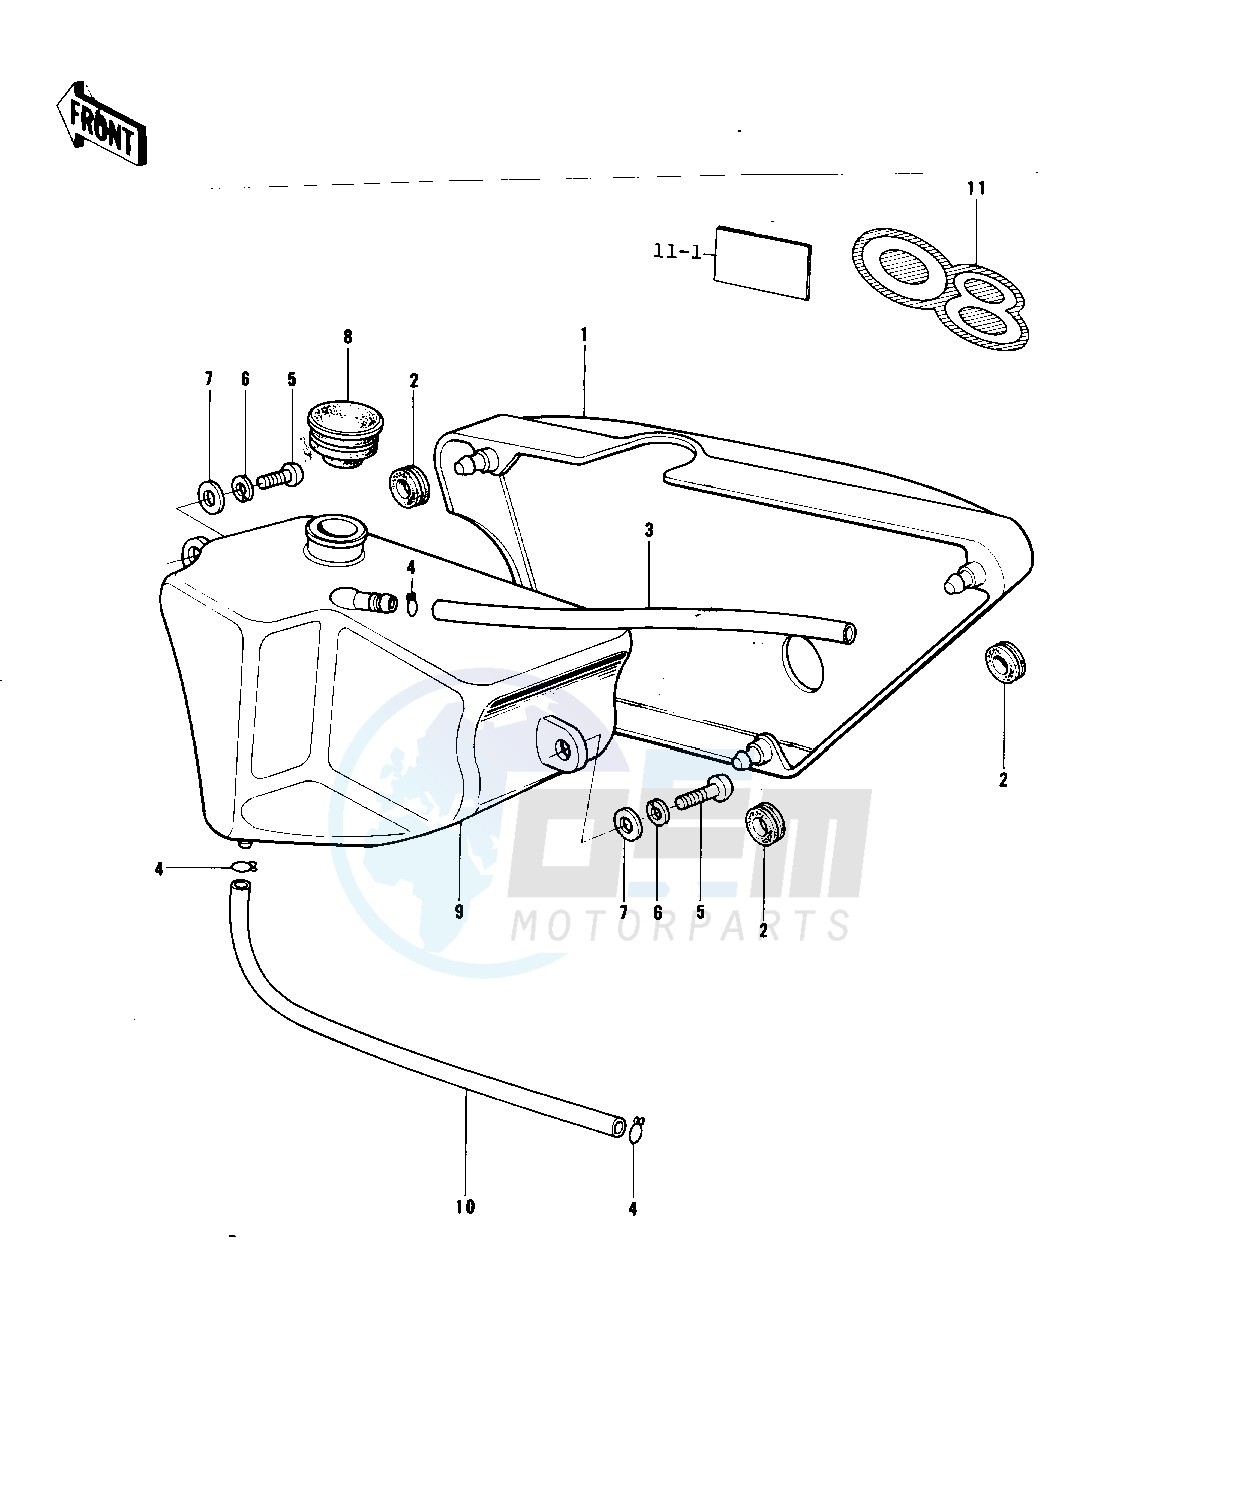 SIDE COVERS_OIL TANK blueprint